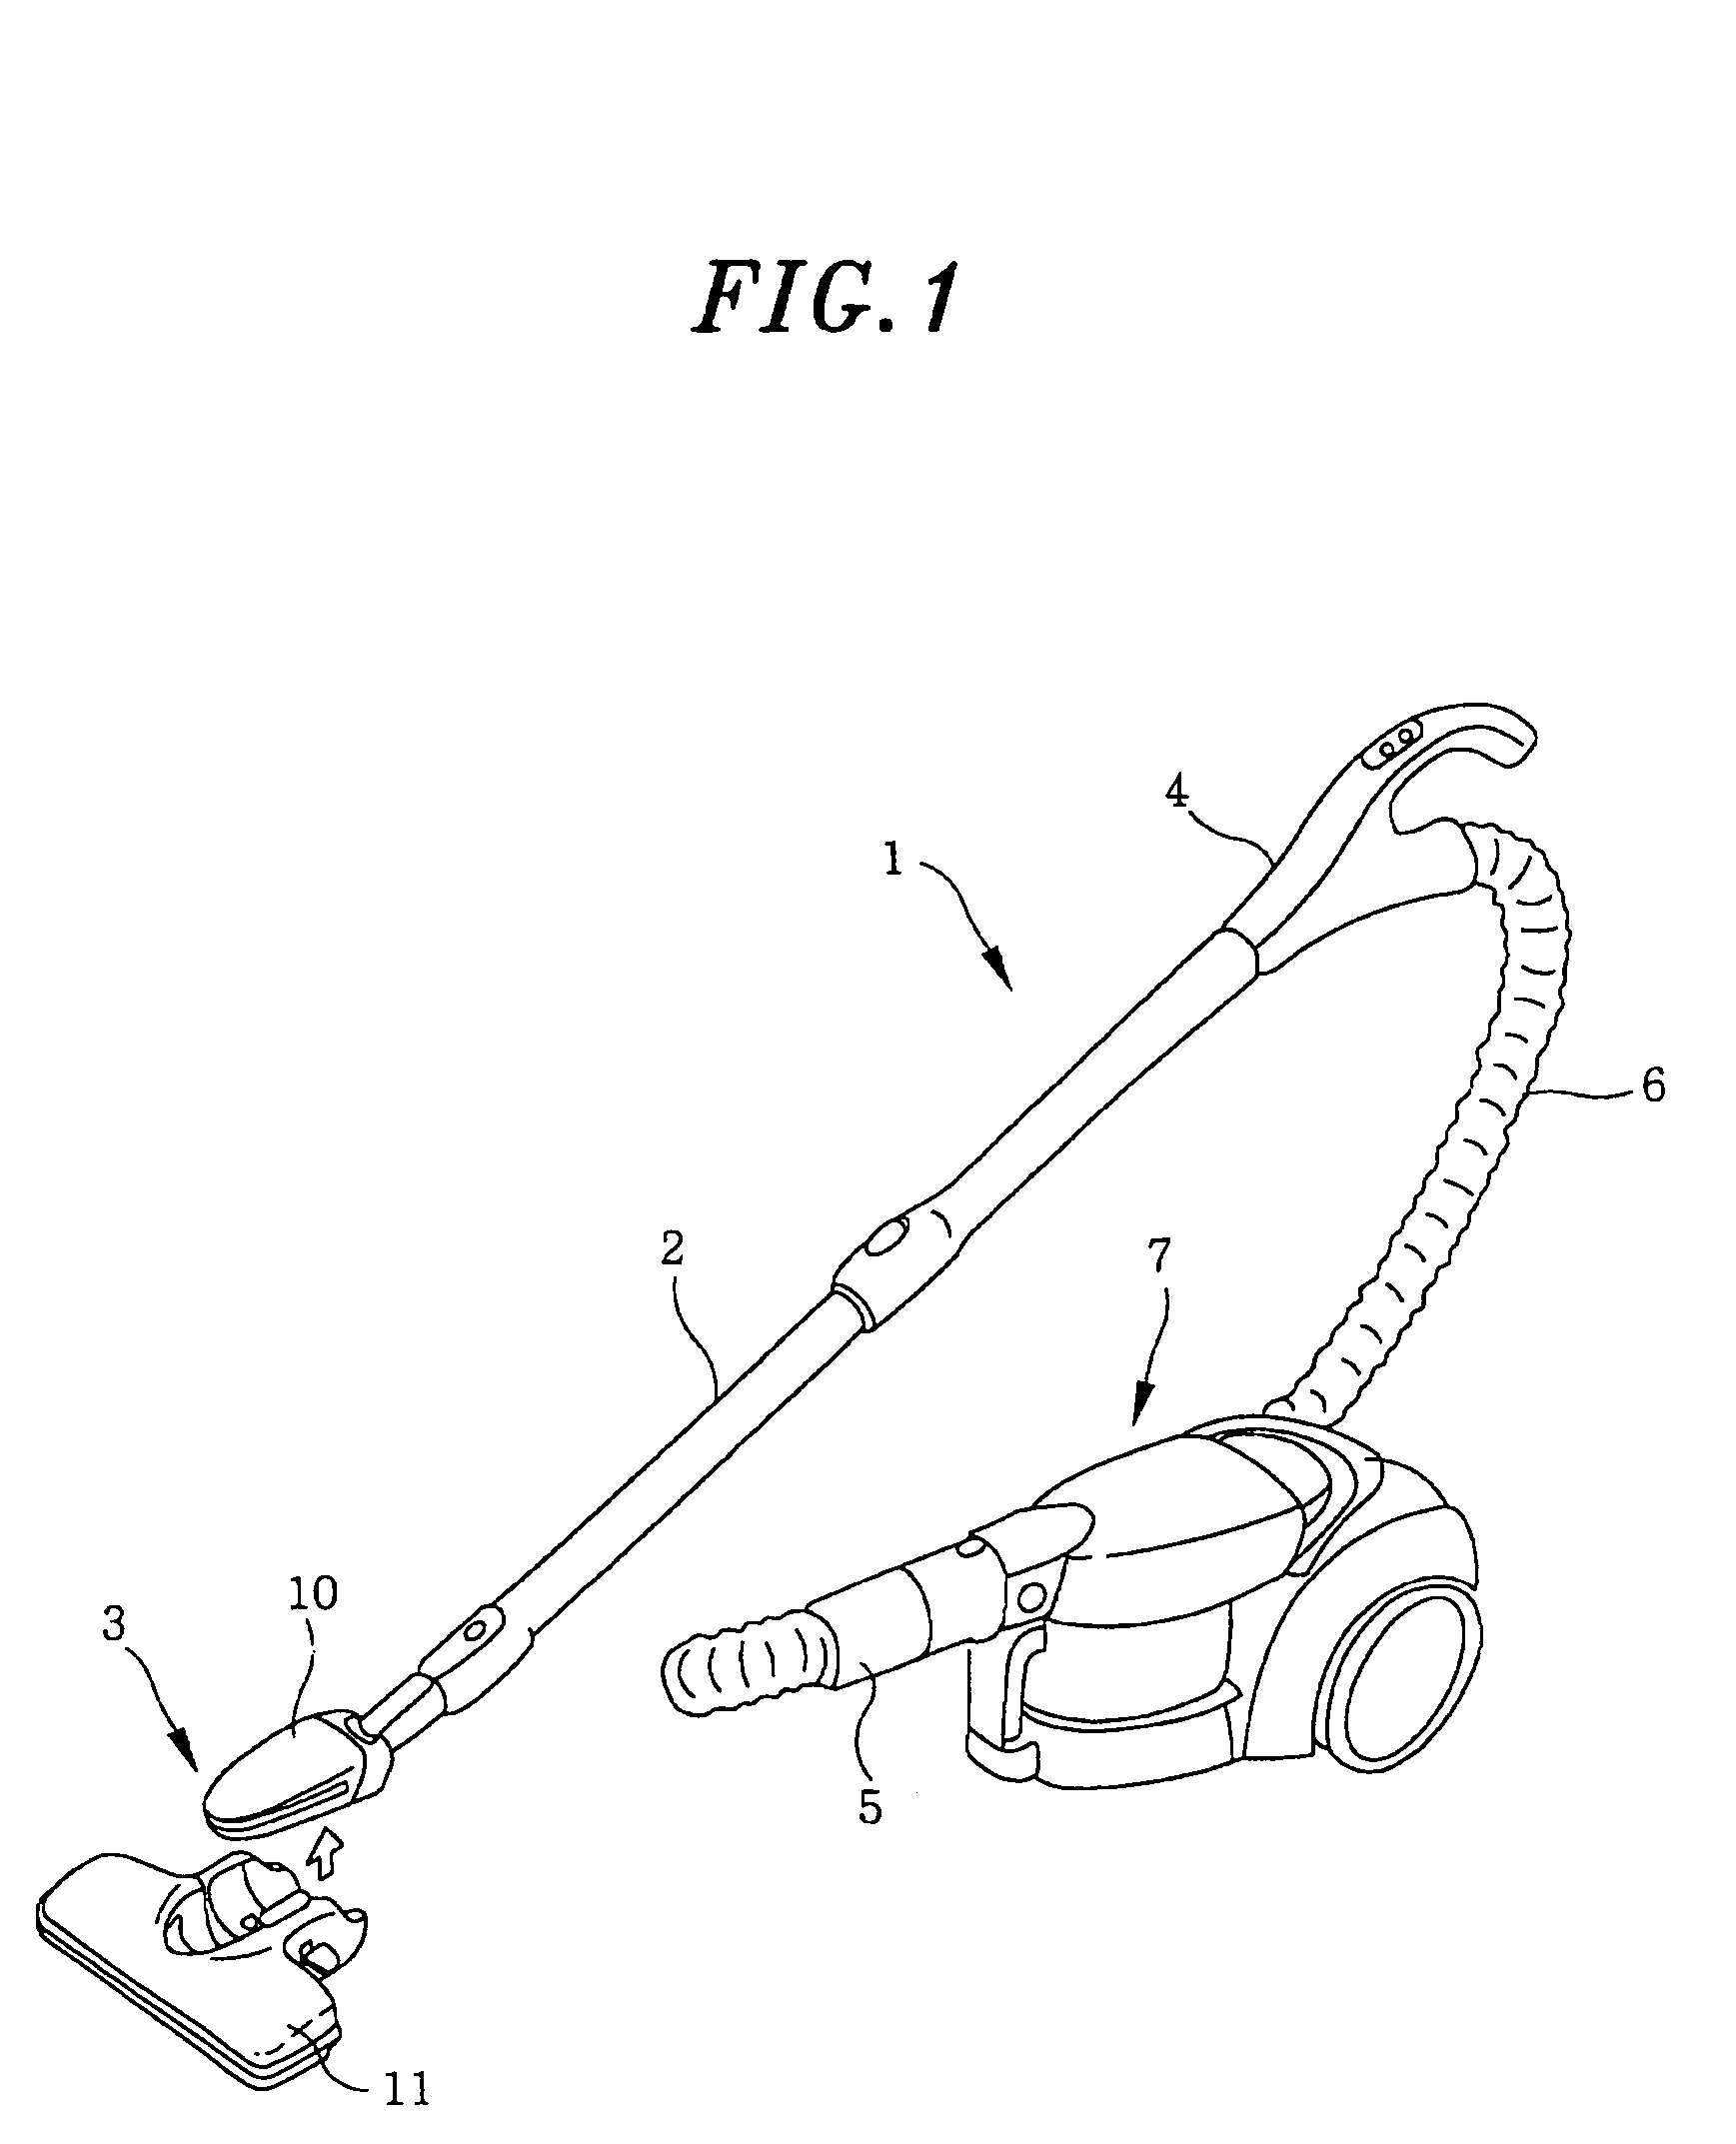 Suction unit for use in an electric vacuum cleaner and electric vacuum cleaner employing same